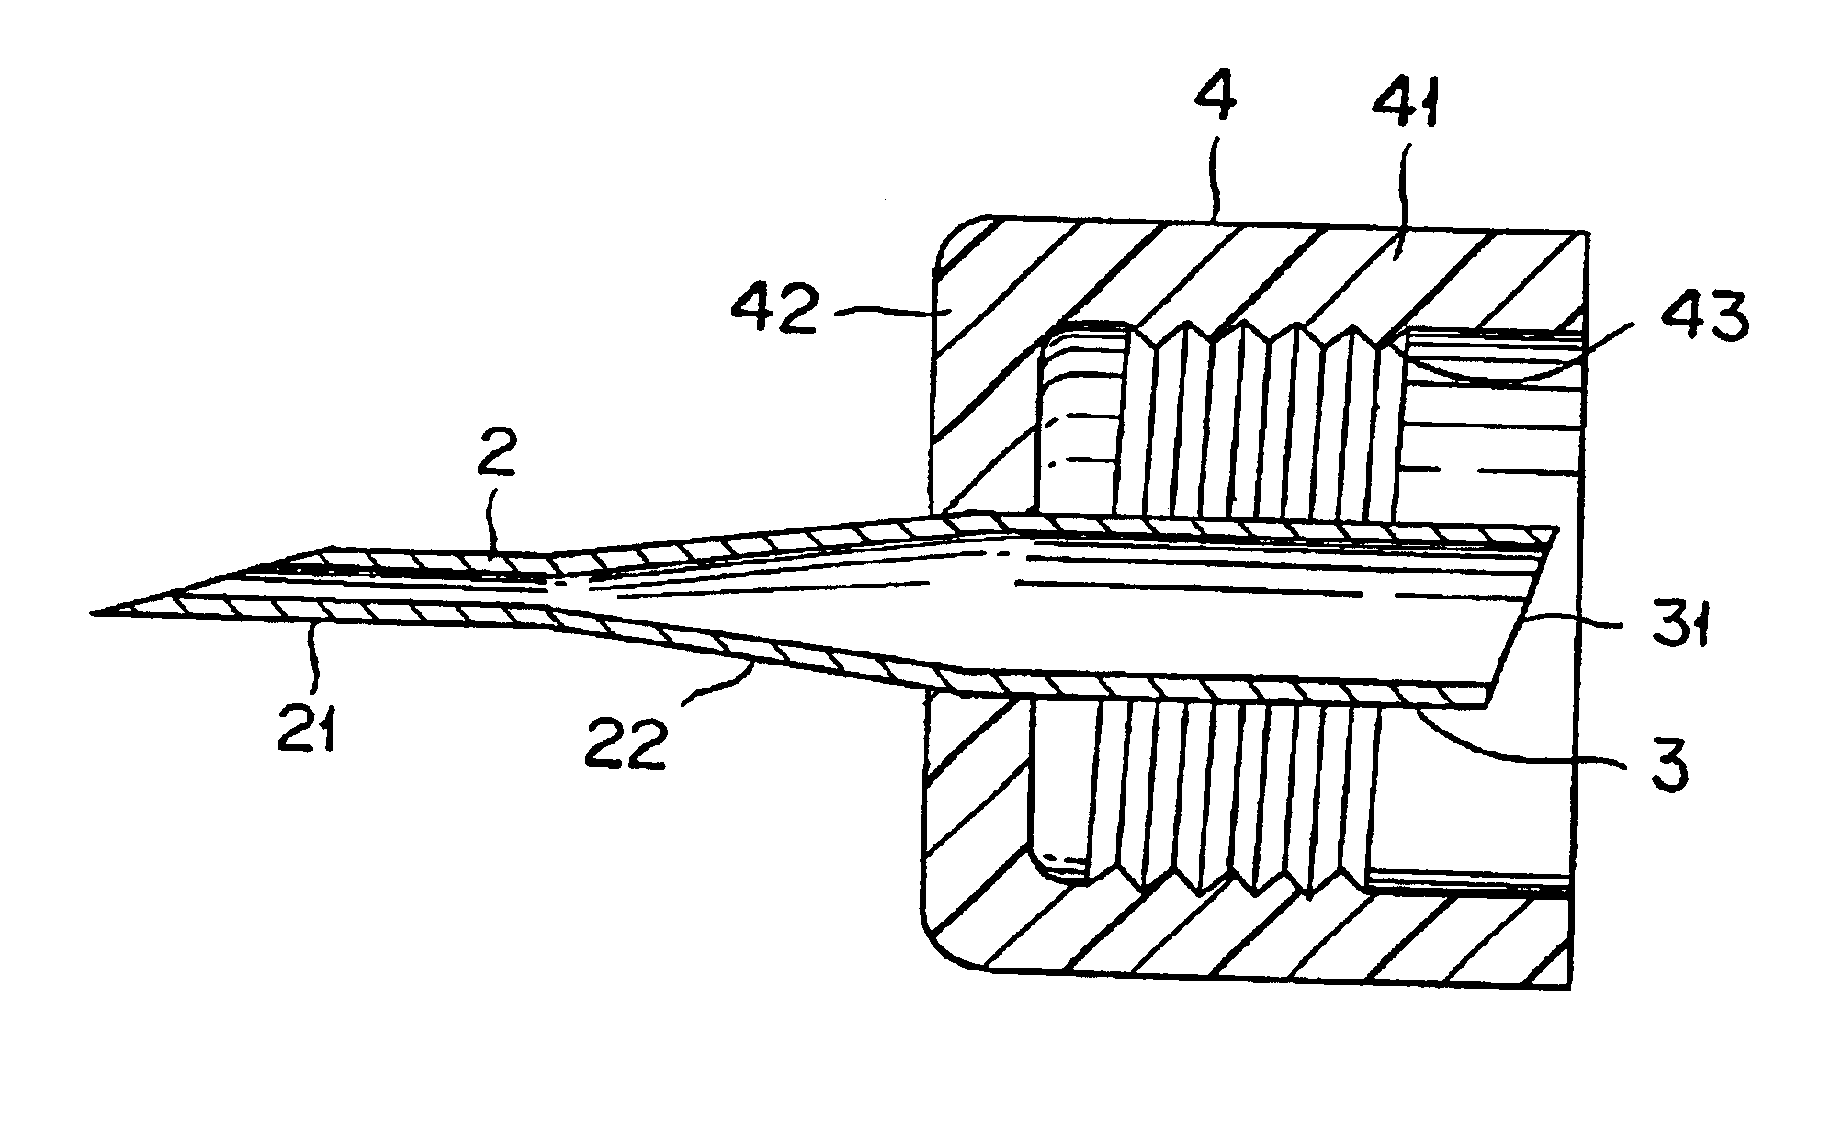 Injection needle and injection apparatus